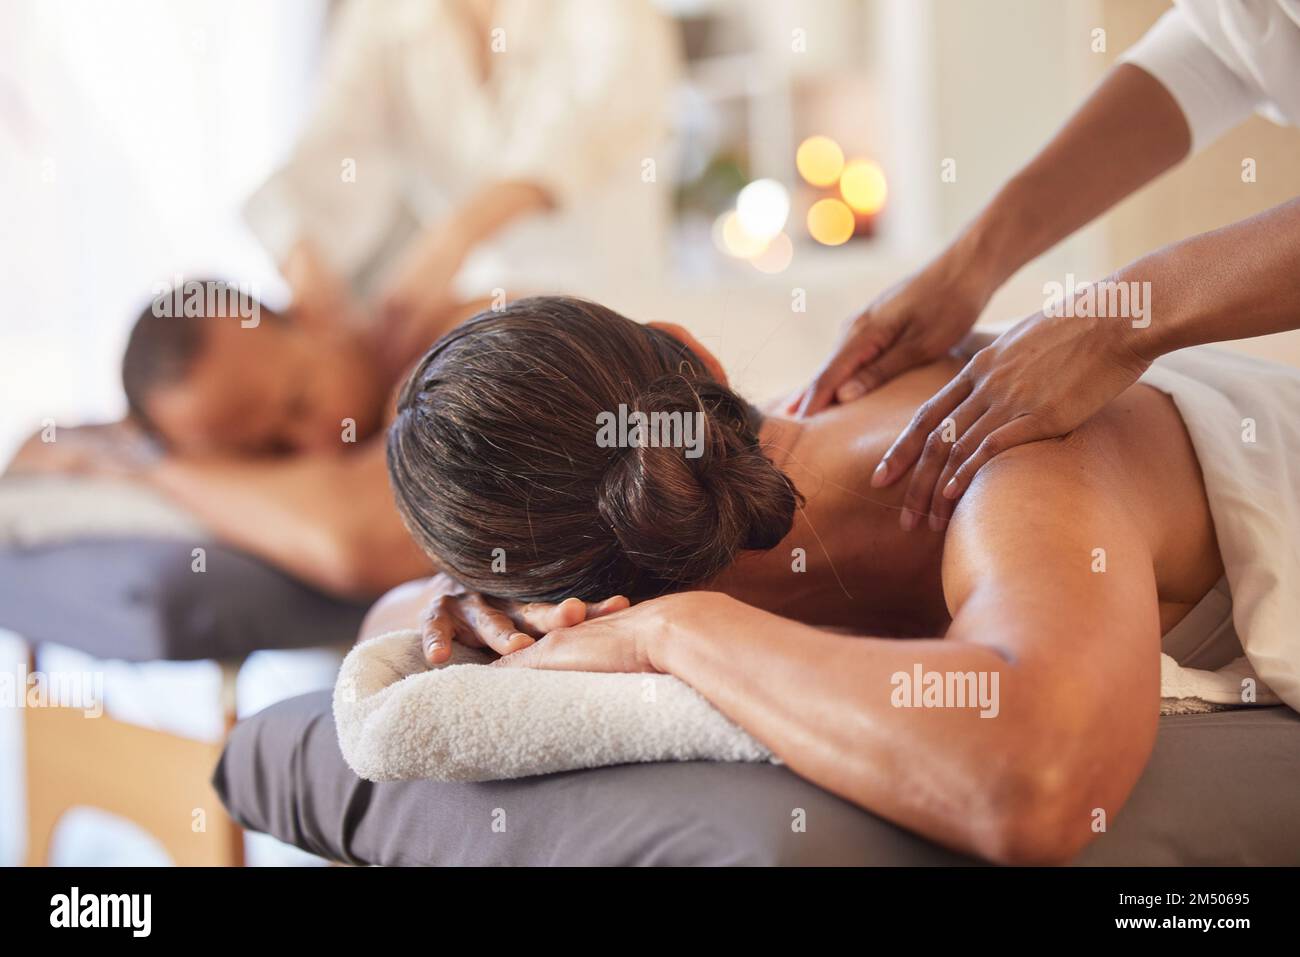 Massage, relax and peace with couple in spa for healing, health and zen treatment. Detox, skincare and beauty with hands of massage therapist on man Stock Photo